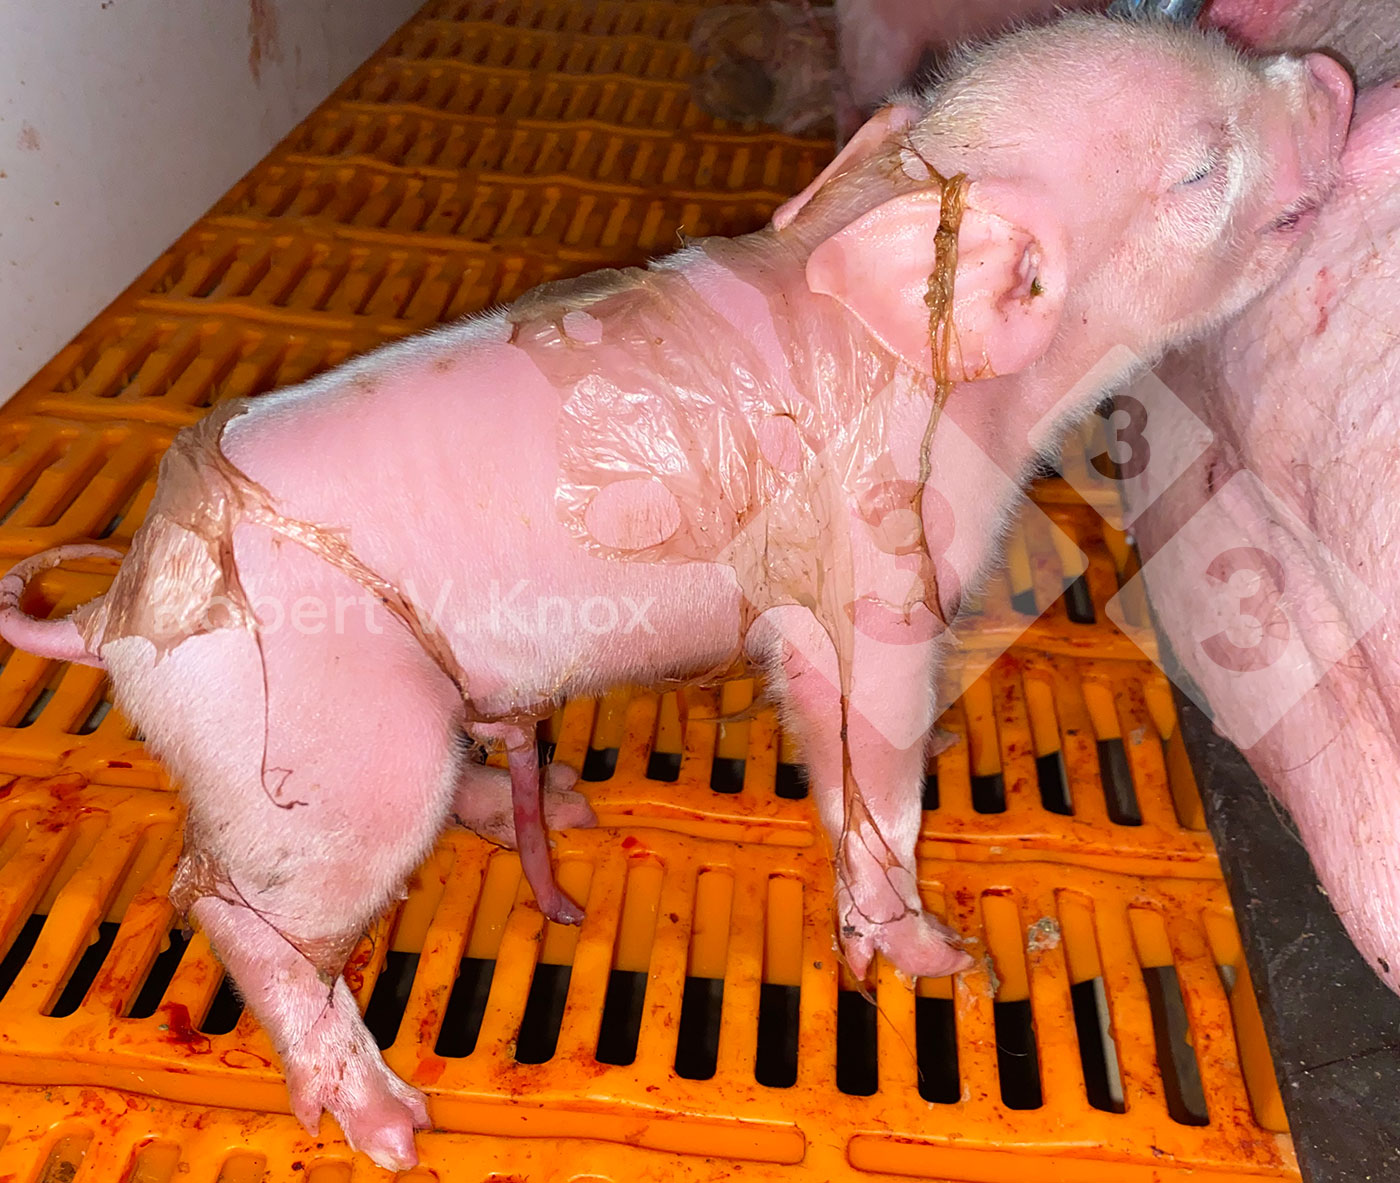 how many tasks do i need to do to age up a new born pig to fully grown